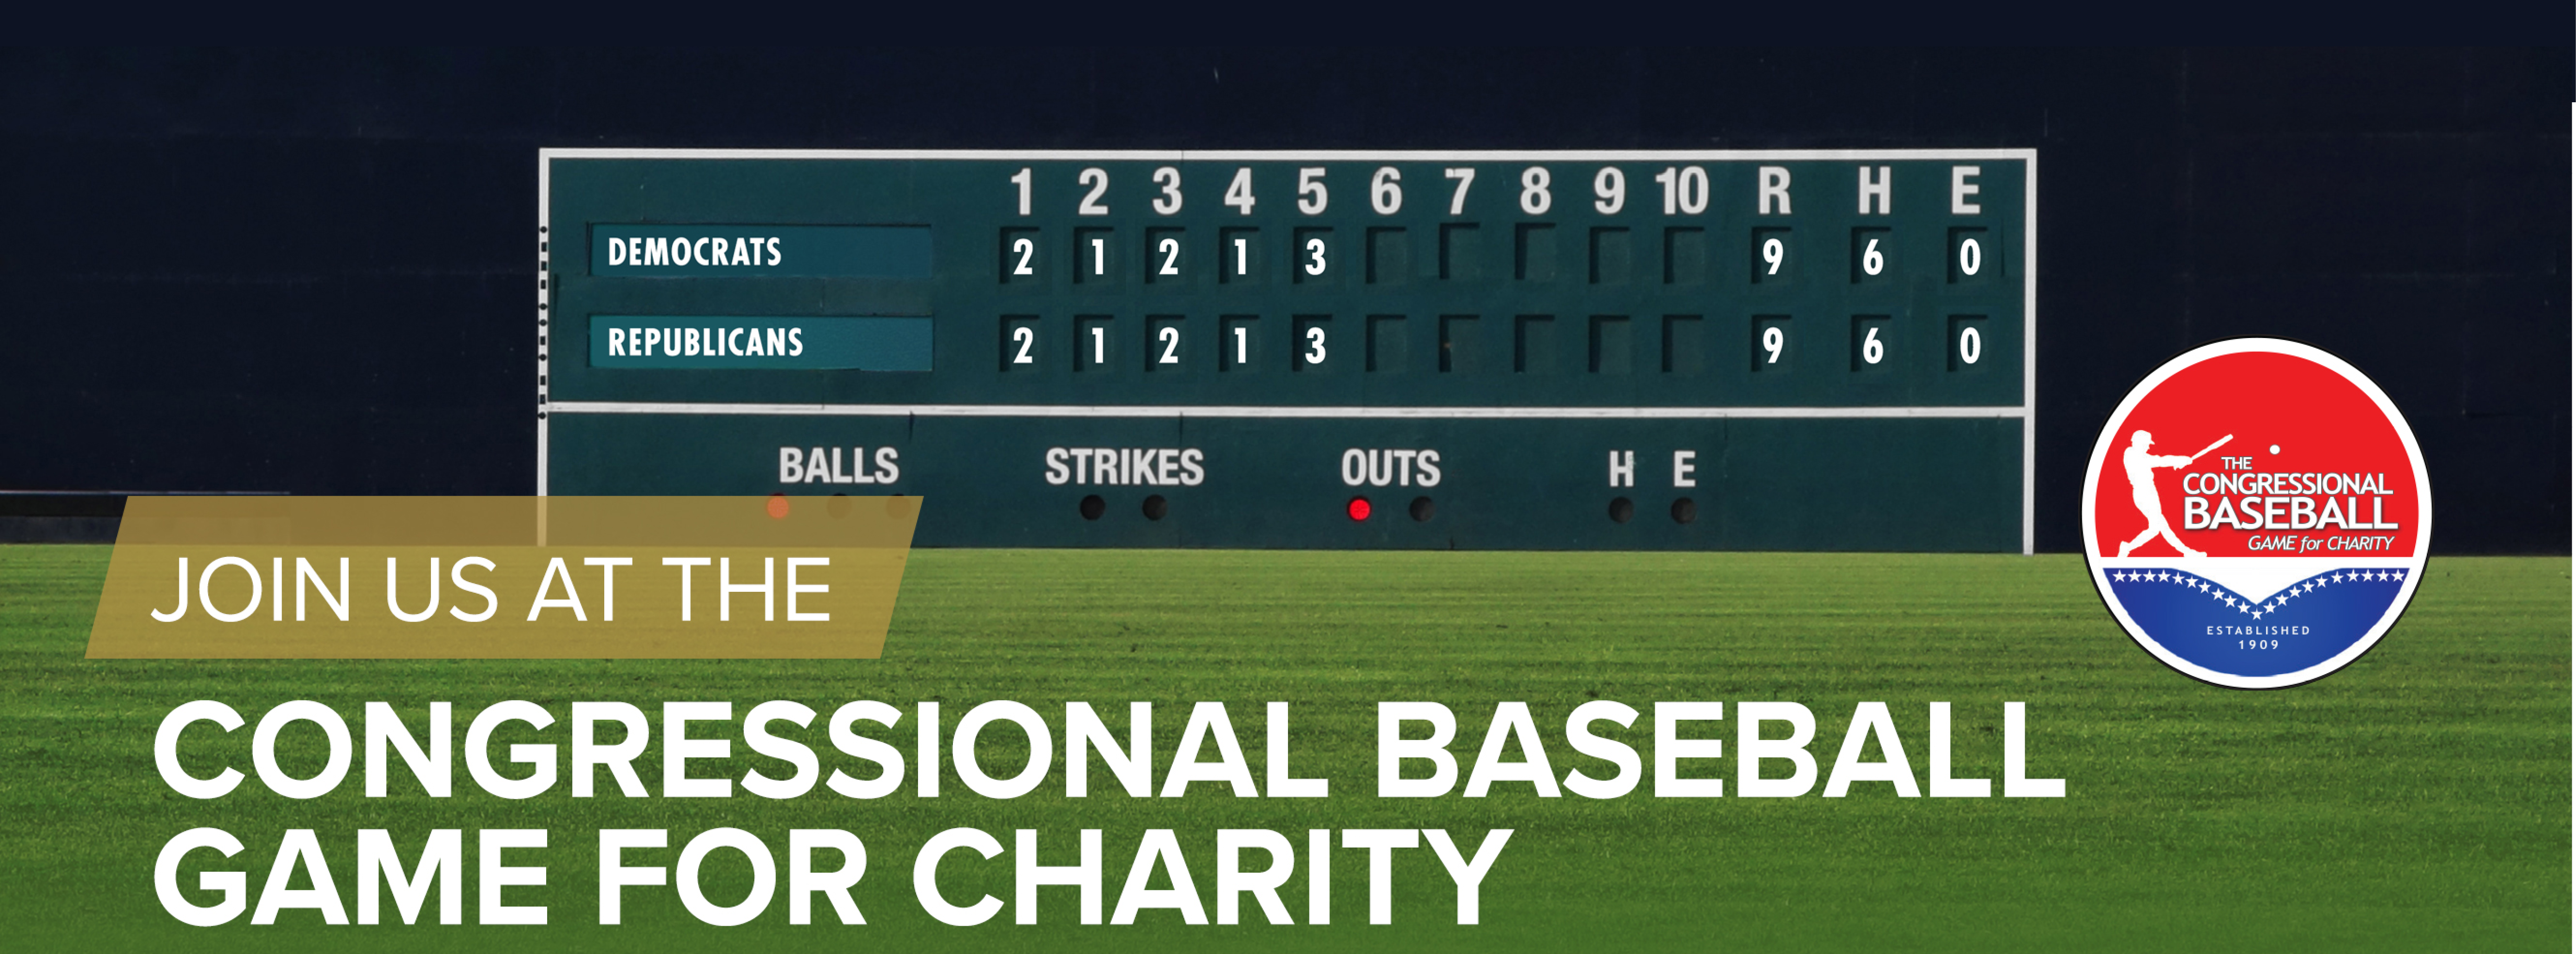 Join us as the Congressional Baseball Game for Charity June 26, 2019, 7:05 PM at Nationals Park